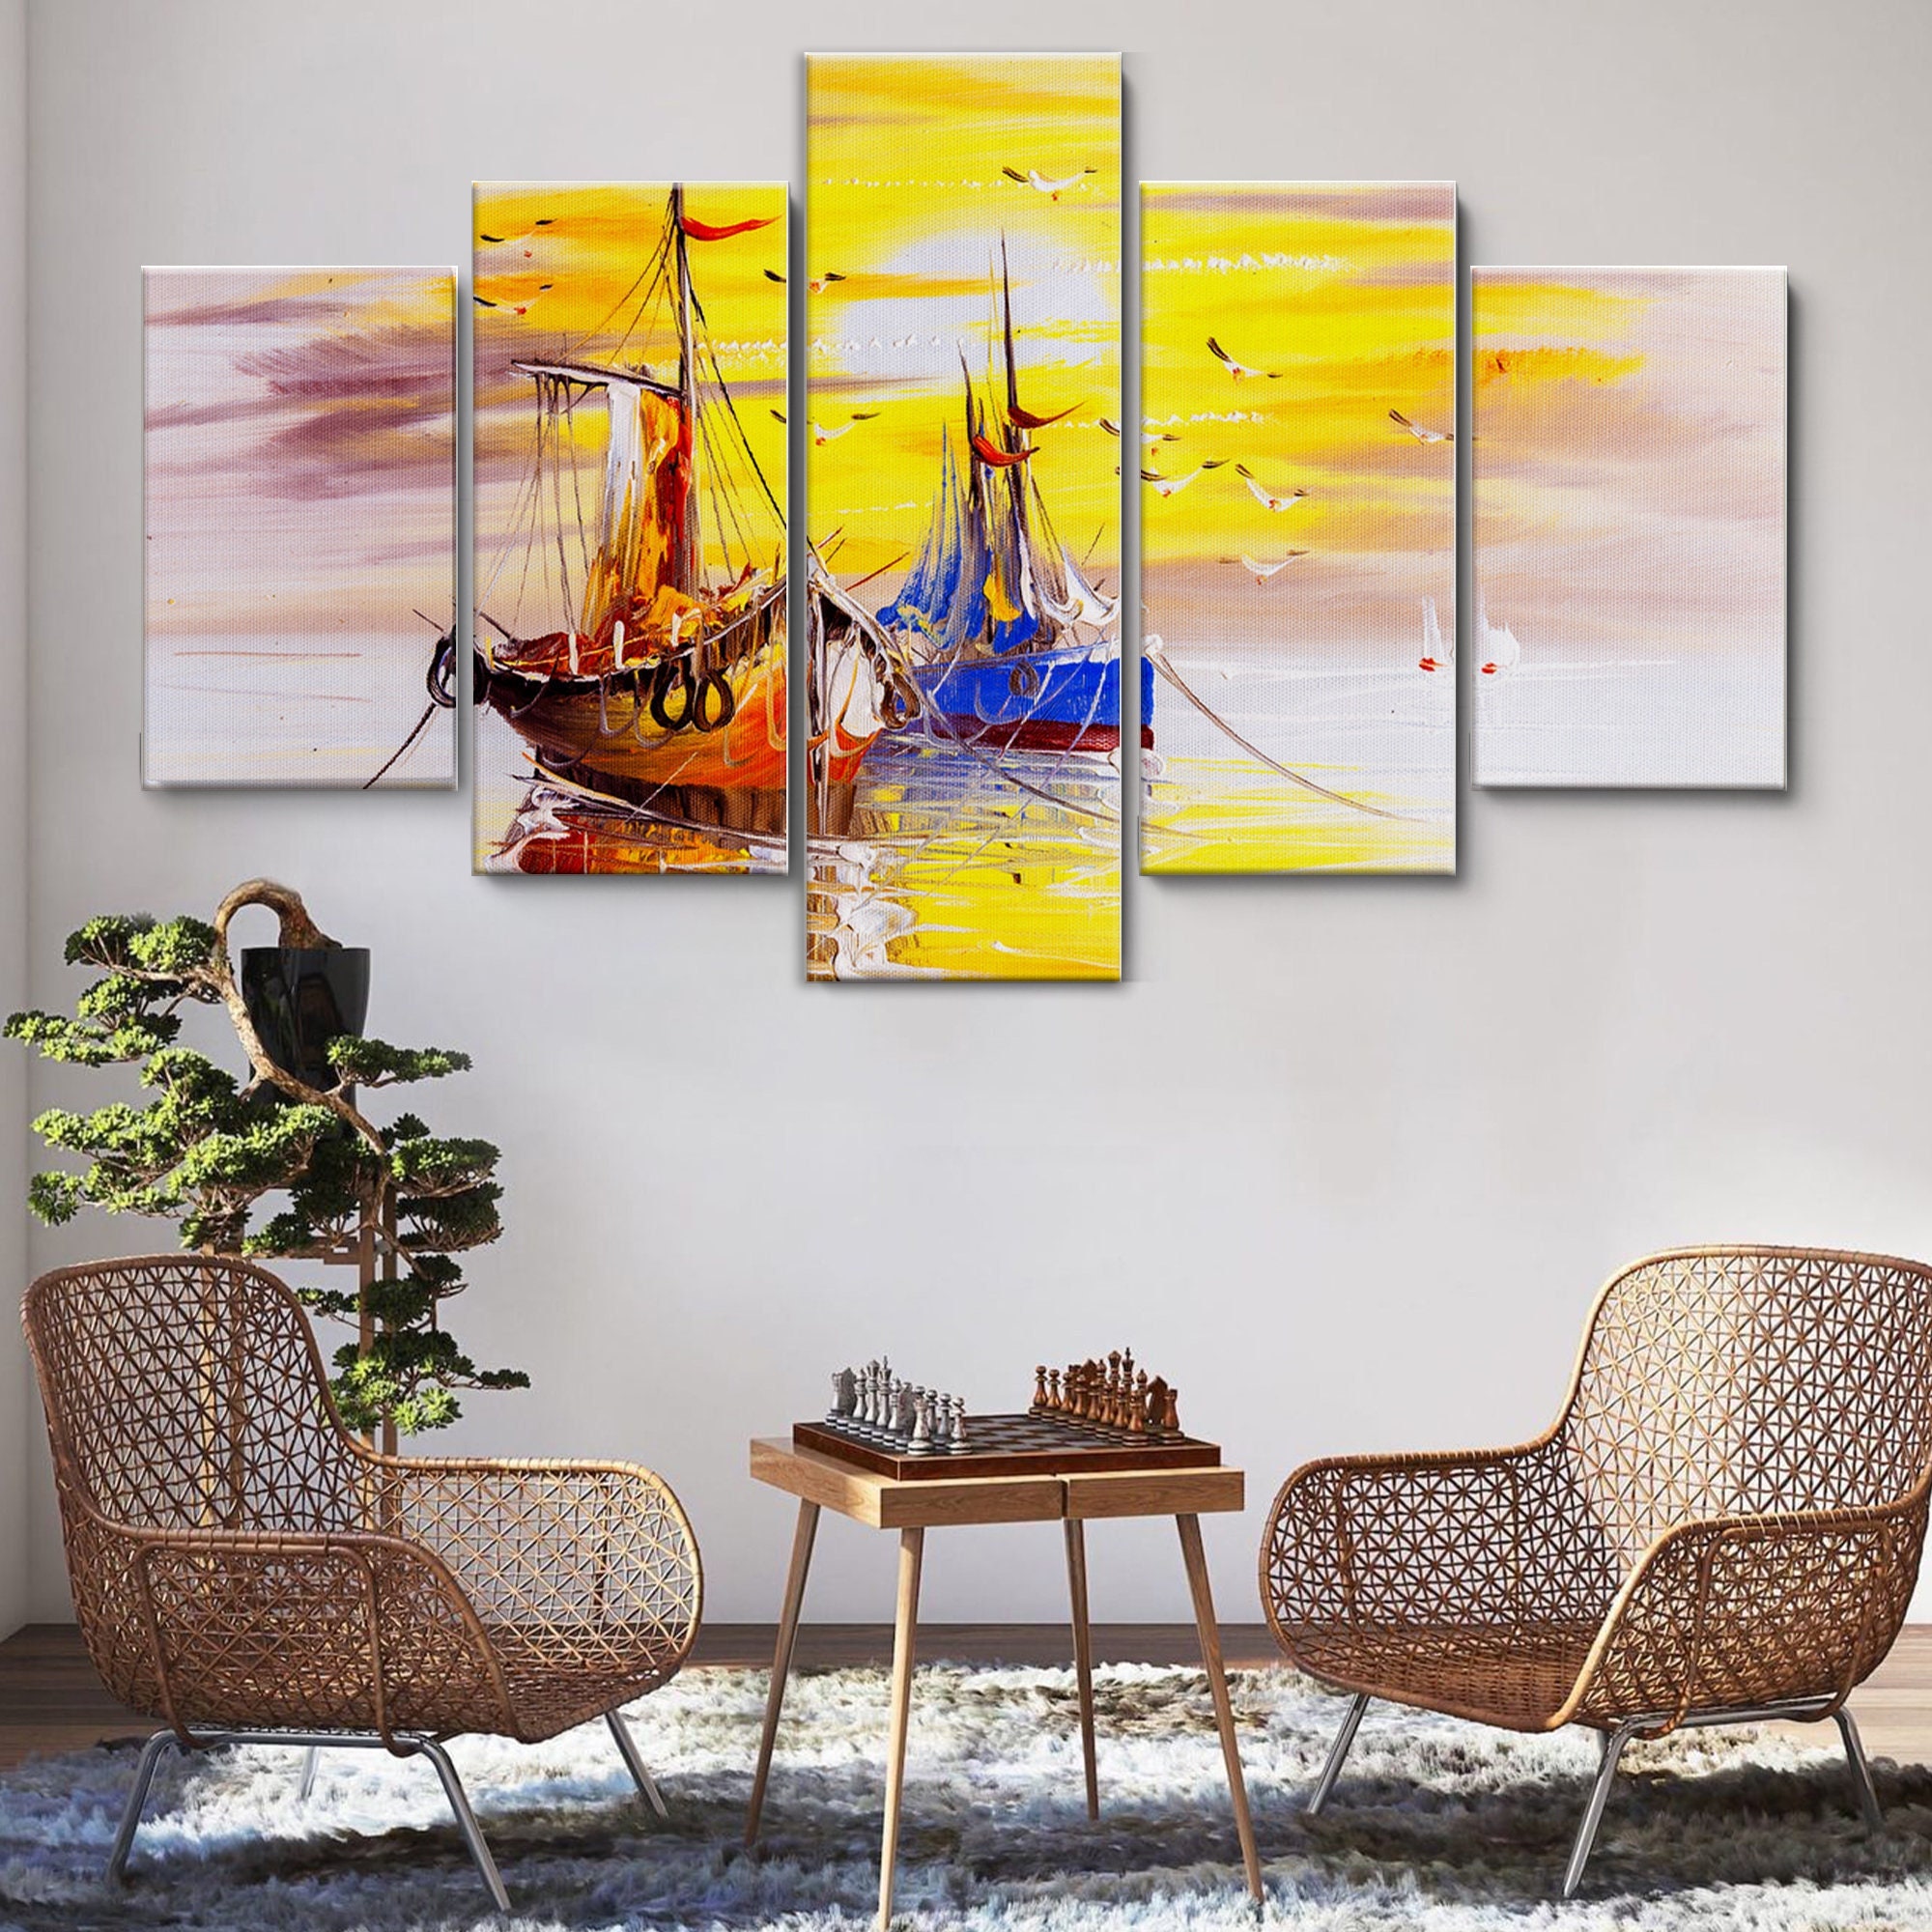 Oil Painting Boat in Sunset 5 Pieces Canvas Wall Art, Large Framed